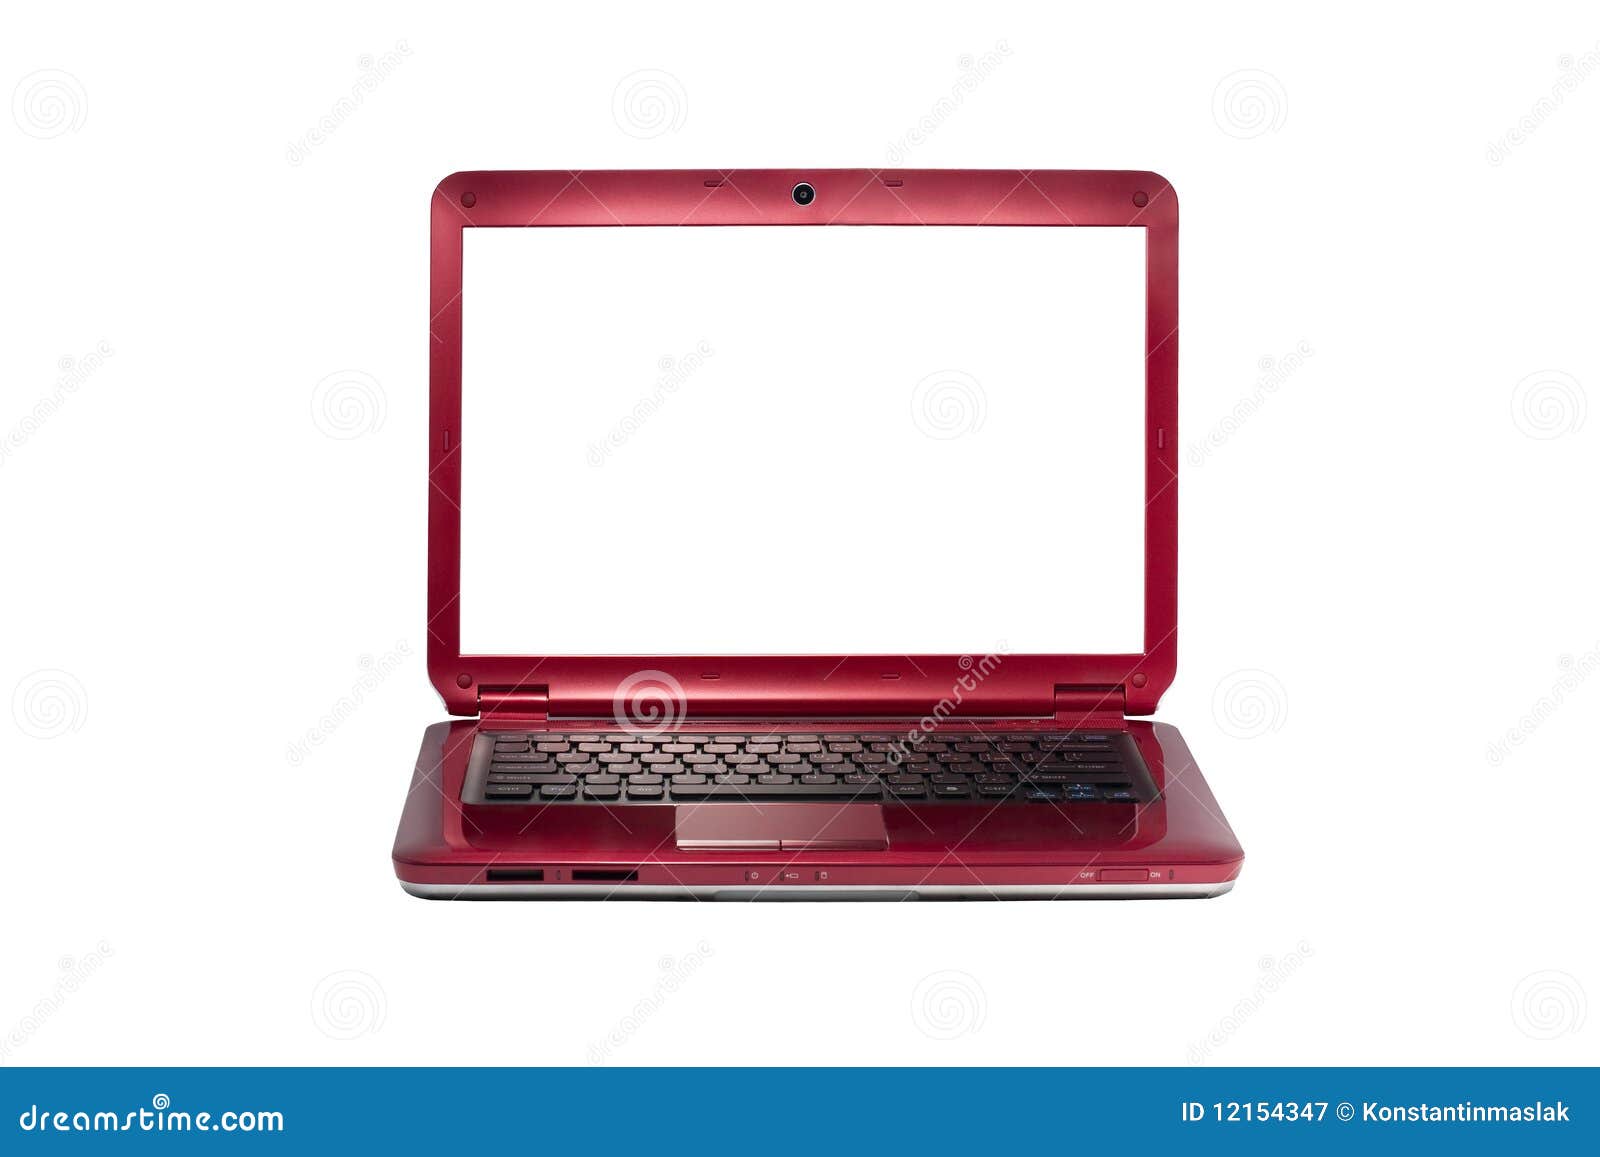 Red Laptop Isolated on White Stock Image of blank, isolated: 12154347